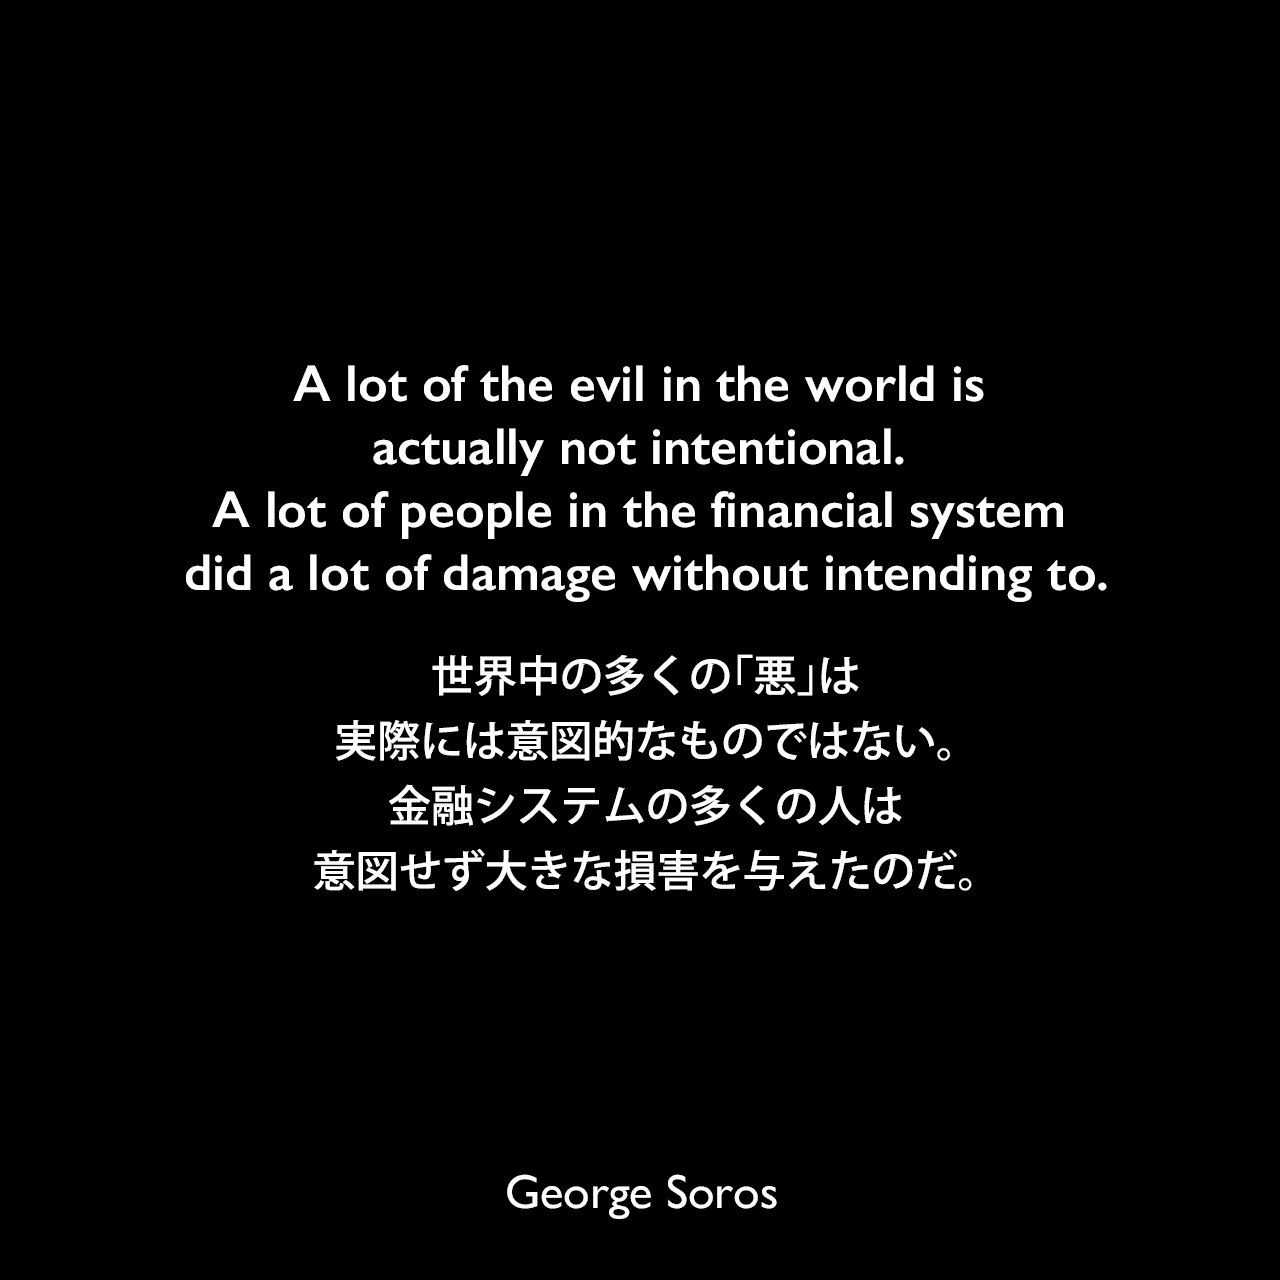 A lot of the evil in the world is actually not intentional. A lot of people in the financial system did a lot of damage without intending to.世界中の多くの「悪」は、実際には意図的なものではない。金融システムの多くの人は、意図せず大きな損害を与えたのだ。George Soros